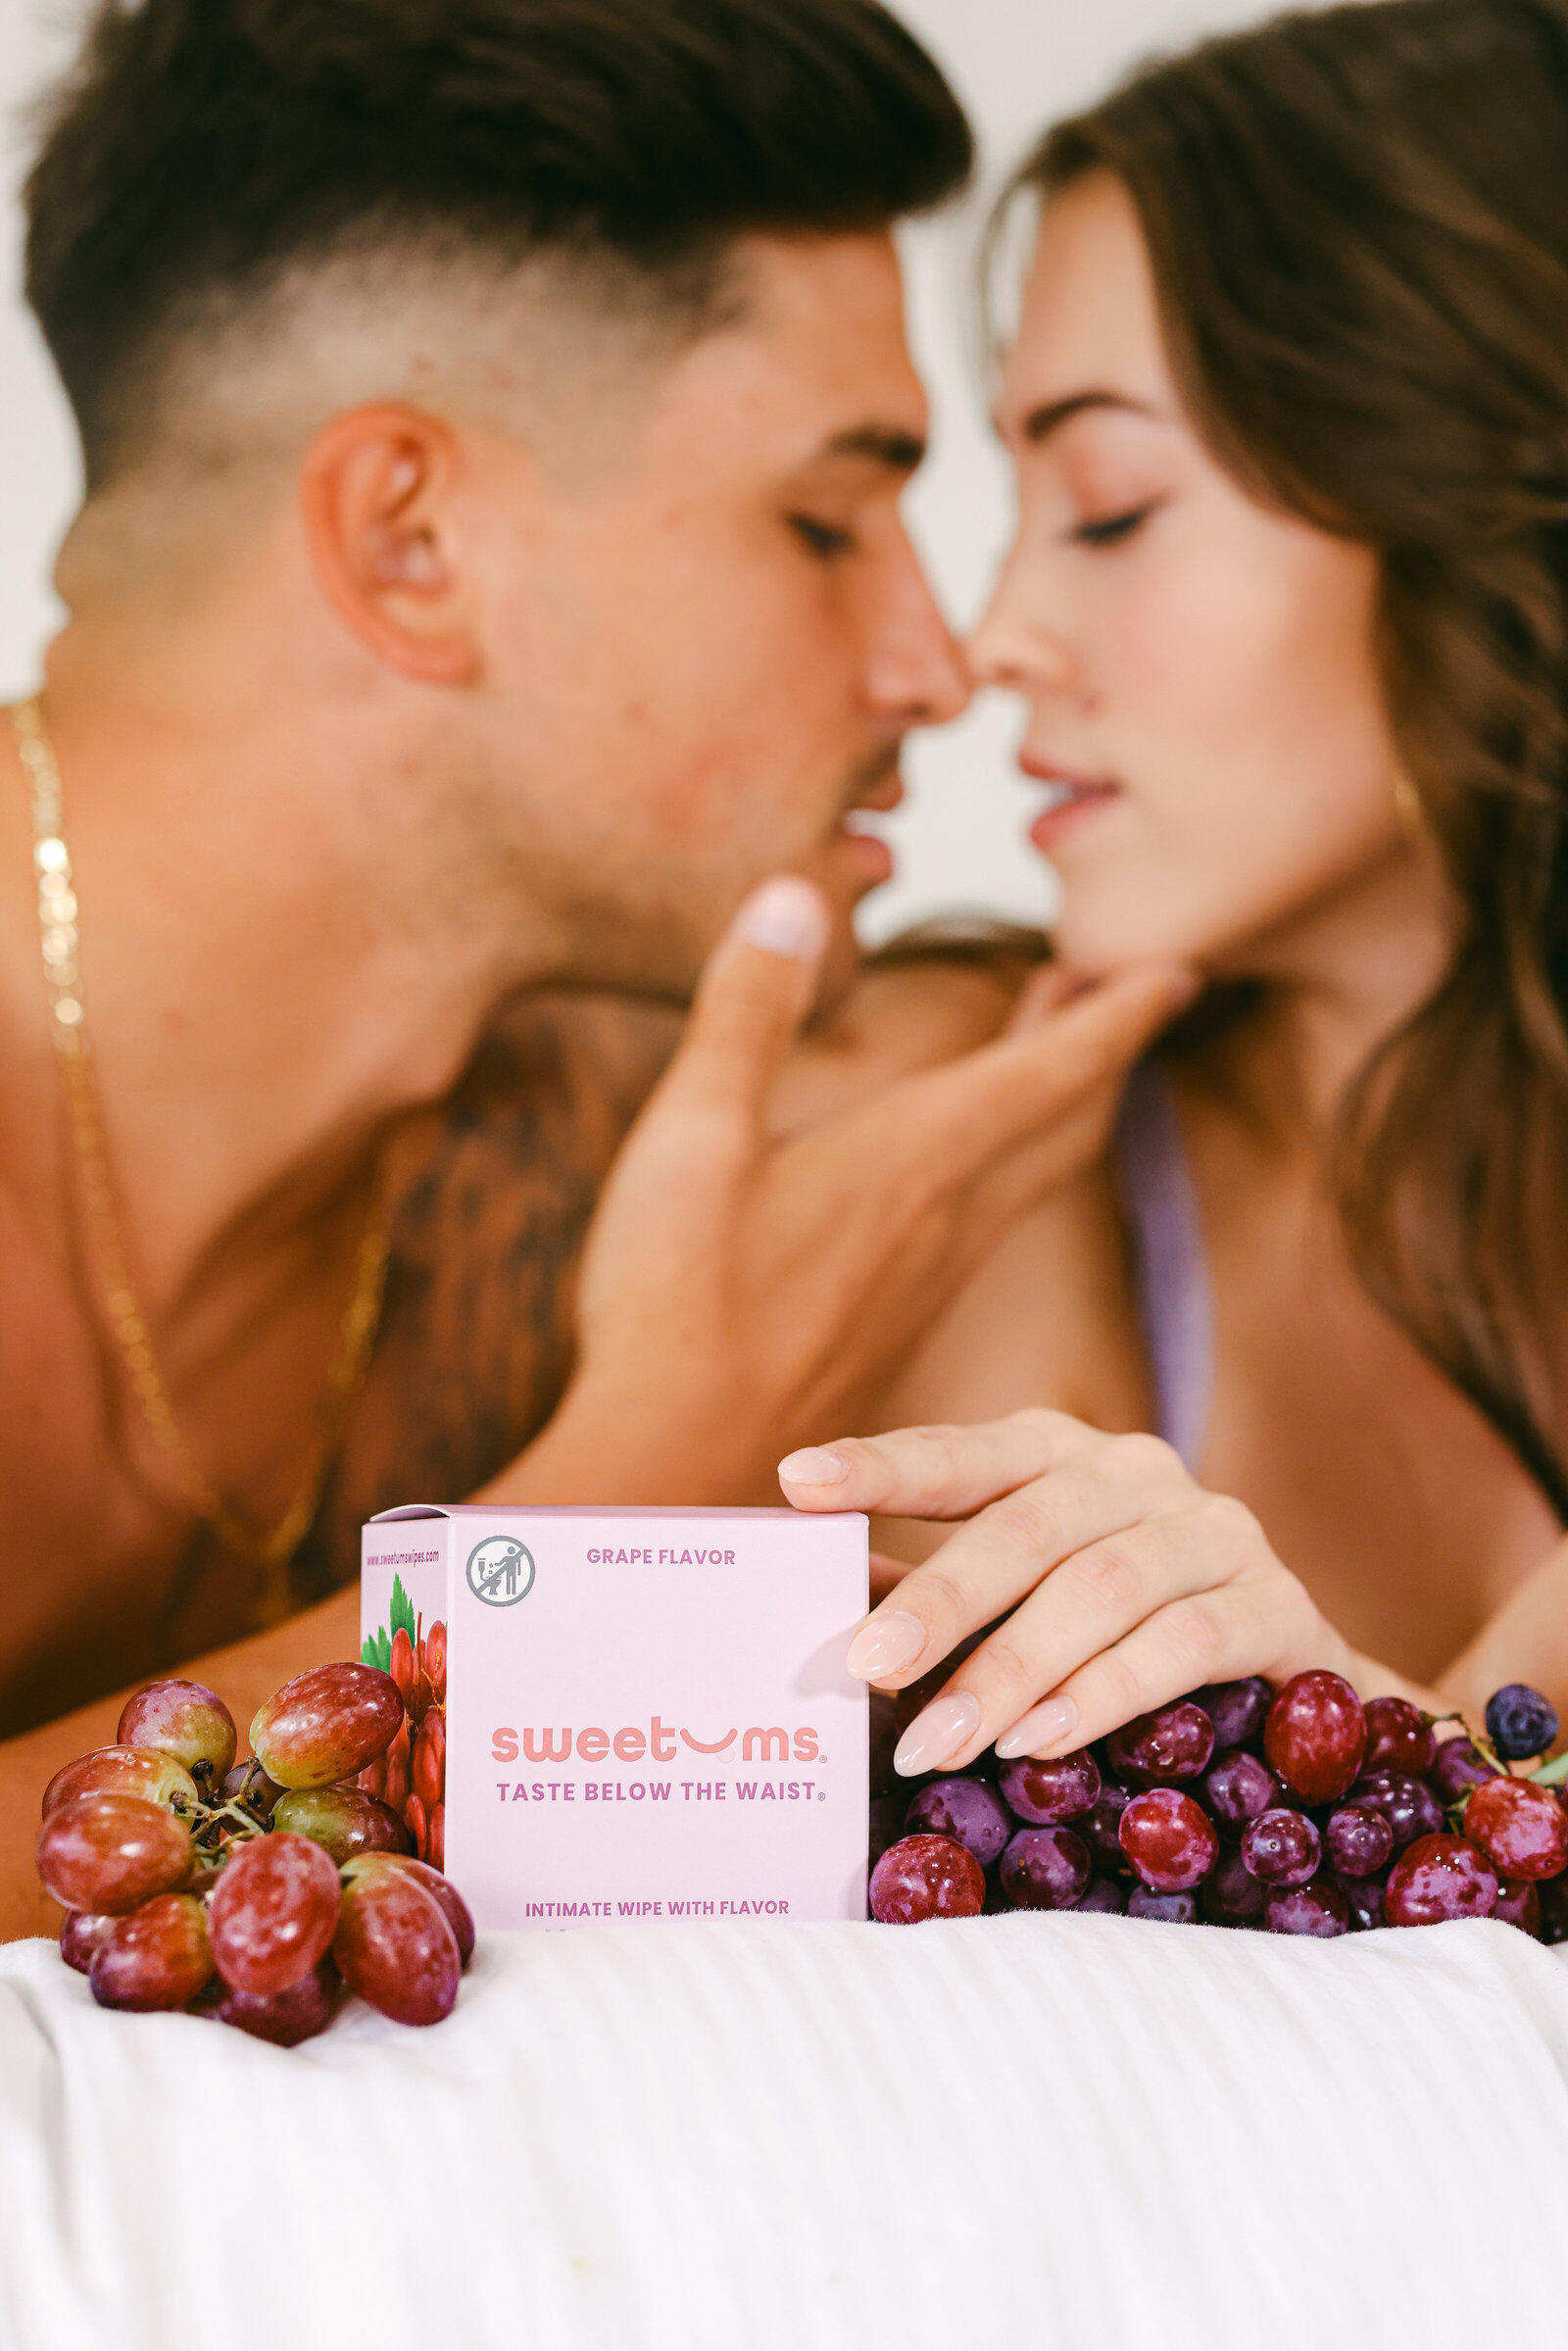 Flavored intimate wipes CPG brand lifestyle product photography with models and grapes